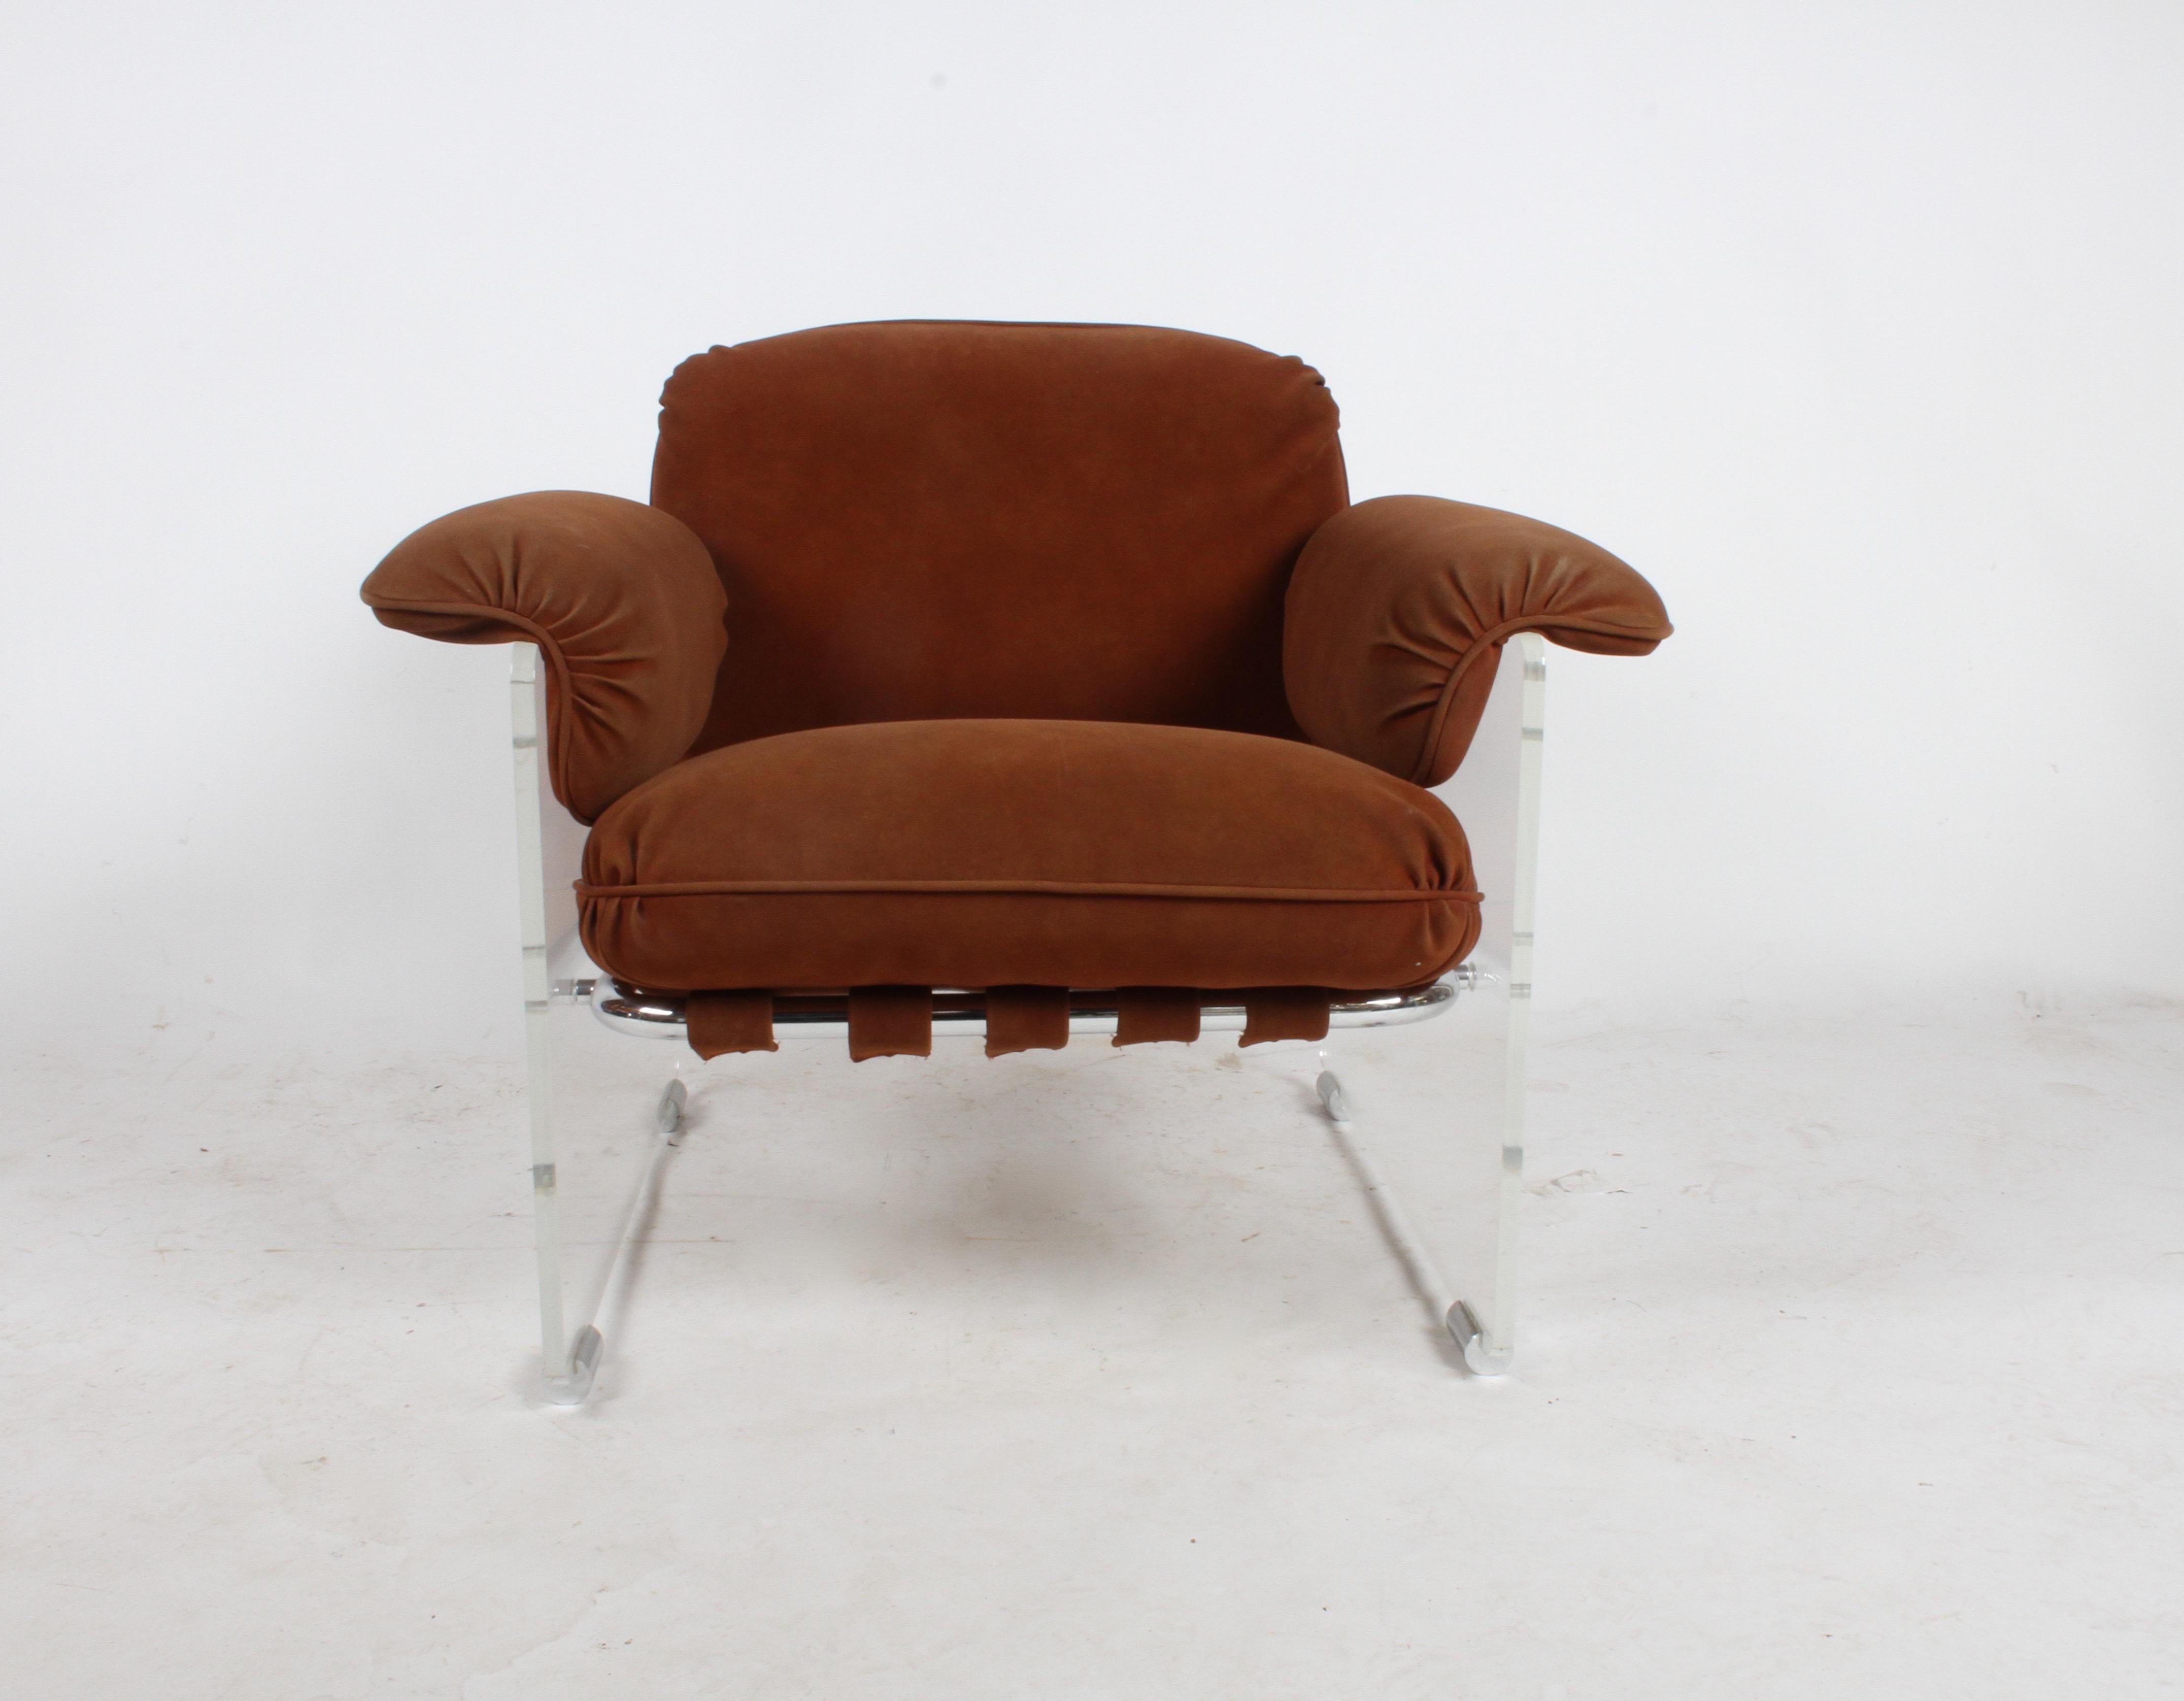 American Pace Collection Argenta Lucite Lounge Chairs, circa 1970s